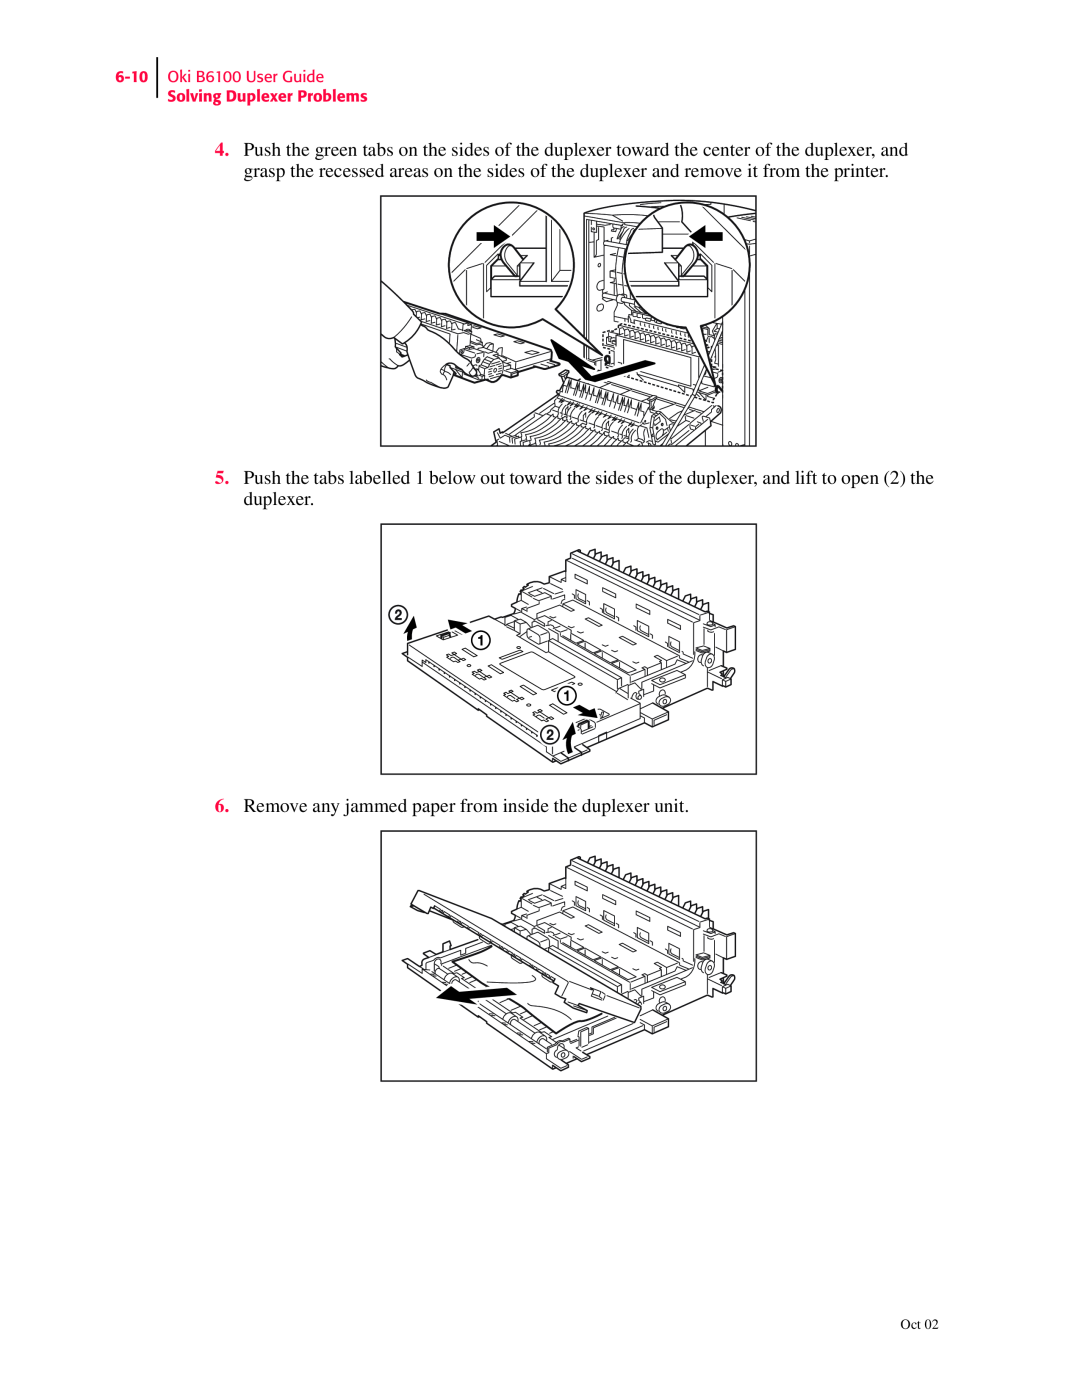 Oki manual Remove any jammed paper from inside the duplexer unit, Oki B6100 User Guide Solving Duplexer Problems 